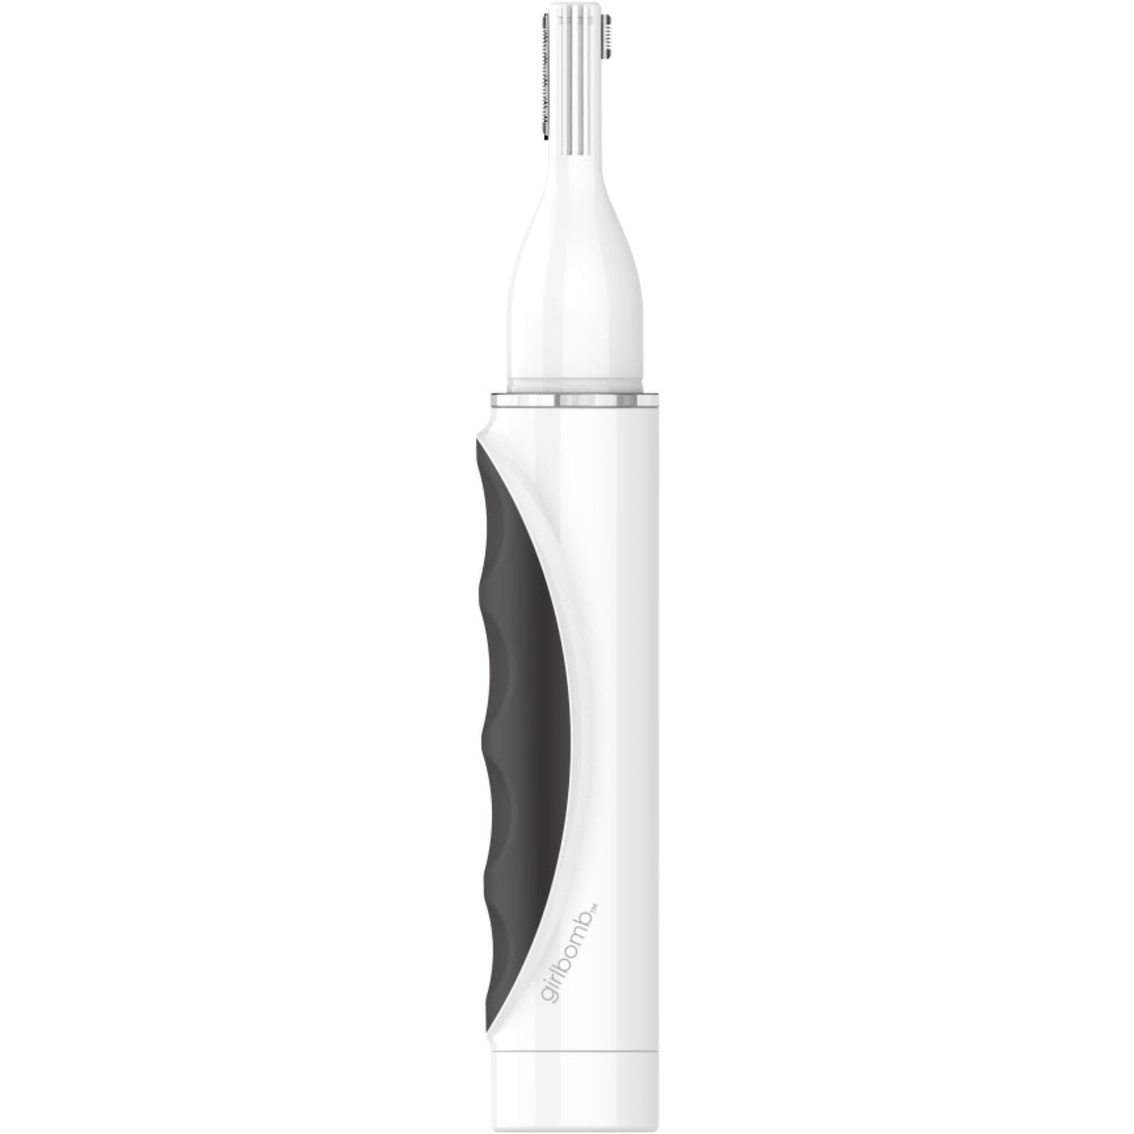 Conair GirlBomb Nose, Brow and Face Trimmer - Image 3 of 10